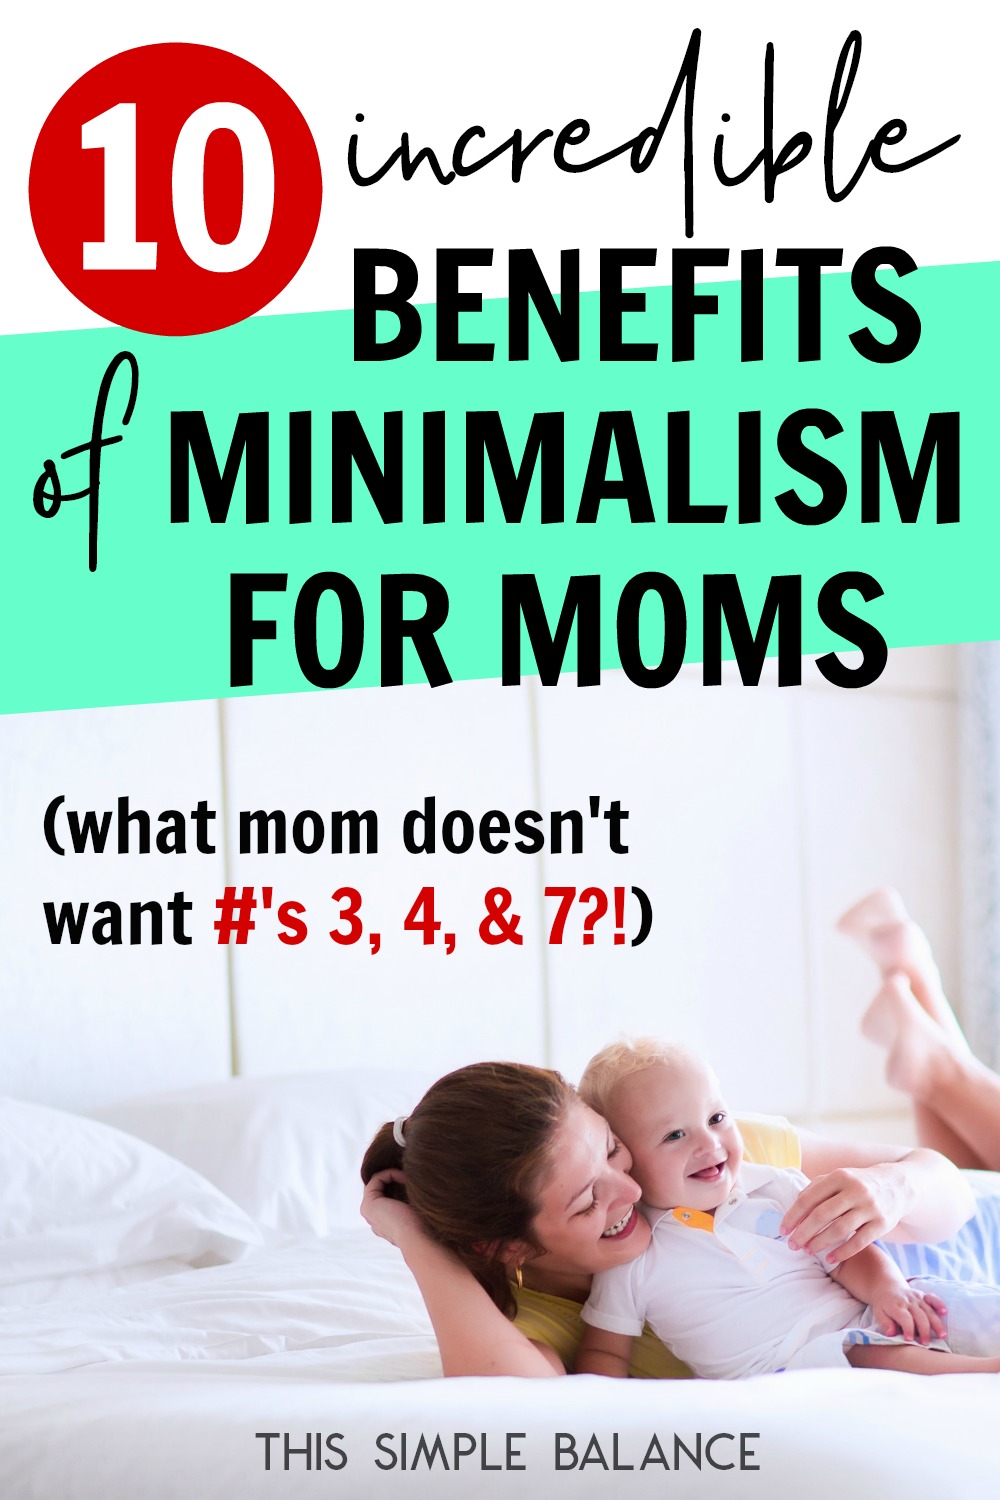 smiling young mom snuggling with older baby on white bed, with text overlay, "10 incredible benefits of minimalism for moms (what mom doesn't want #'s 3, 4, & 7!)"